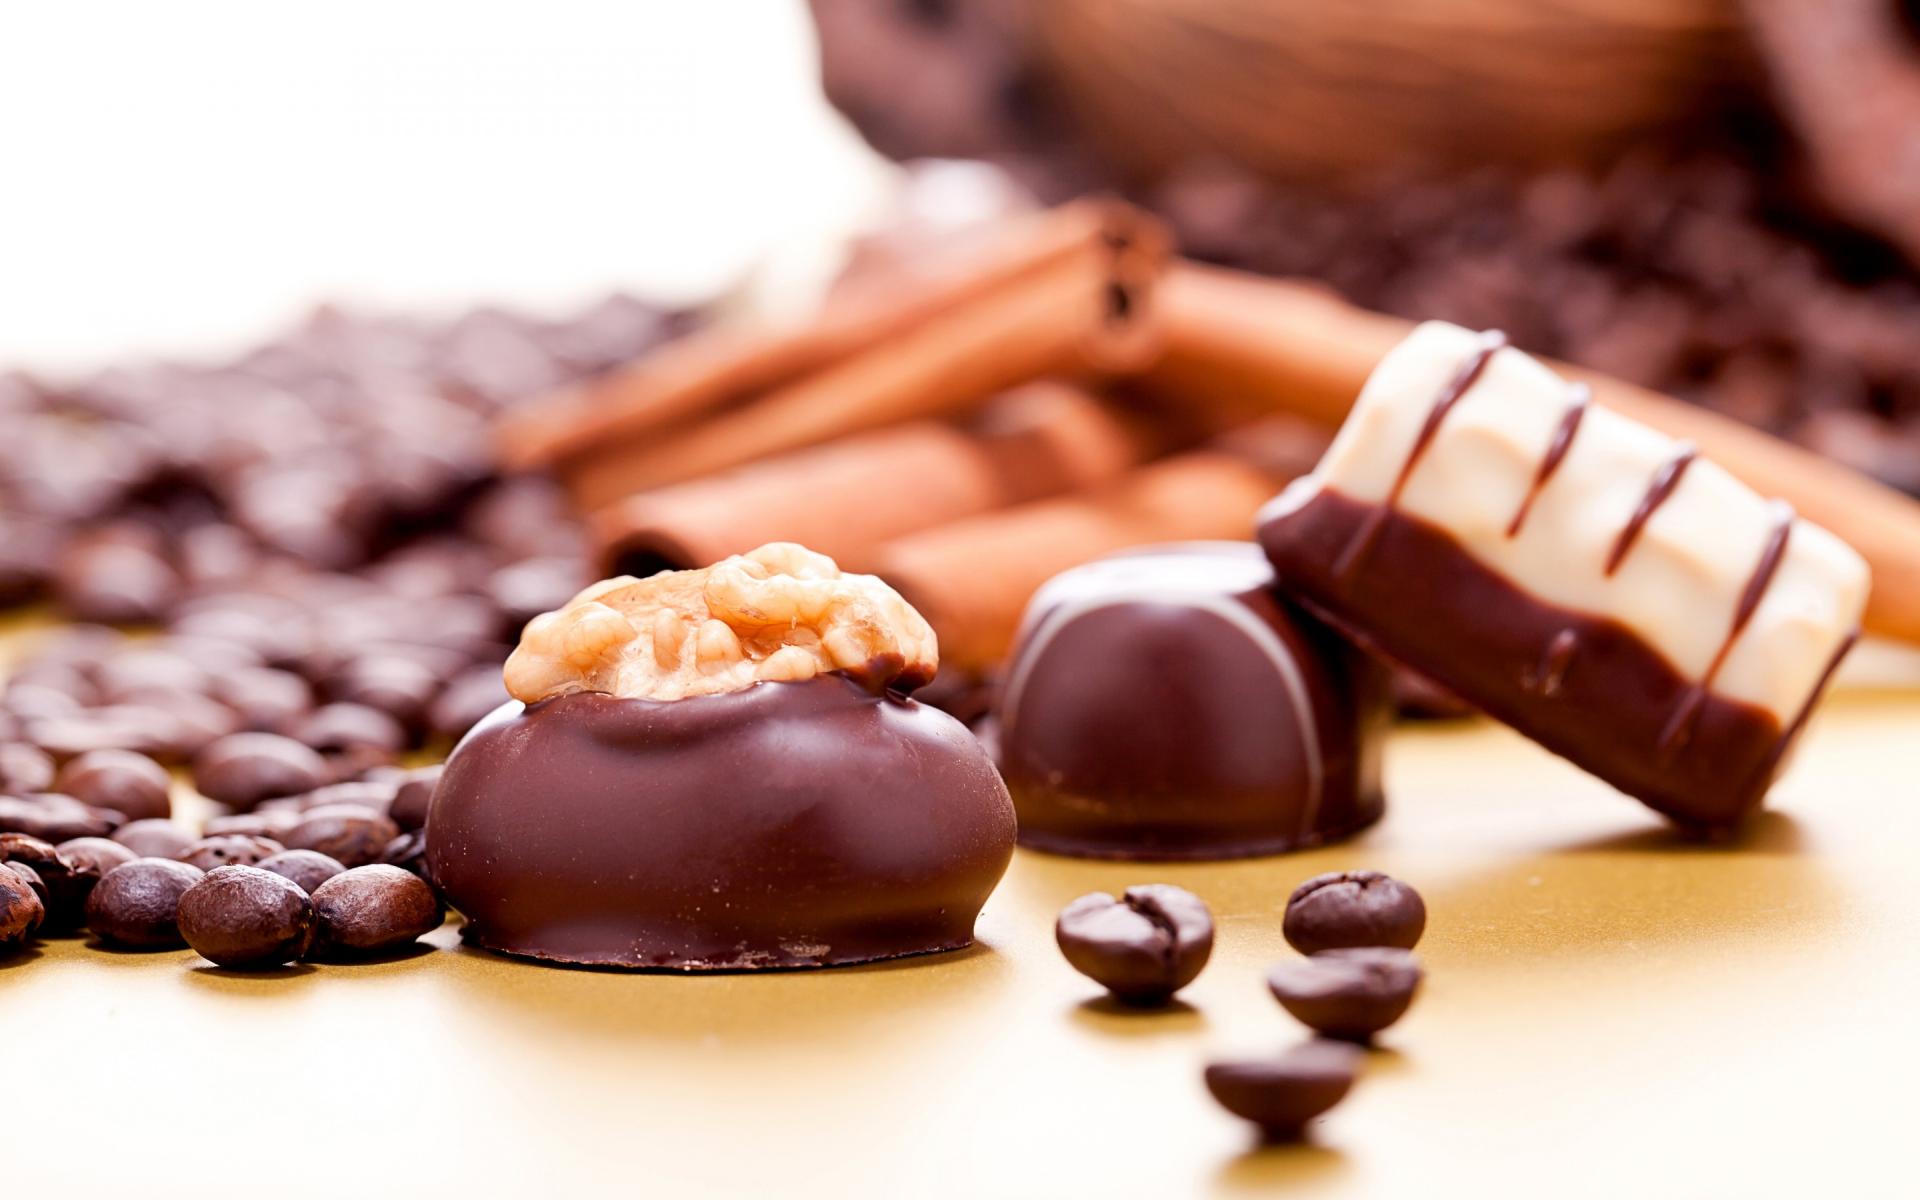 Six reasons why real chocolate is good for health